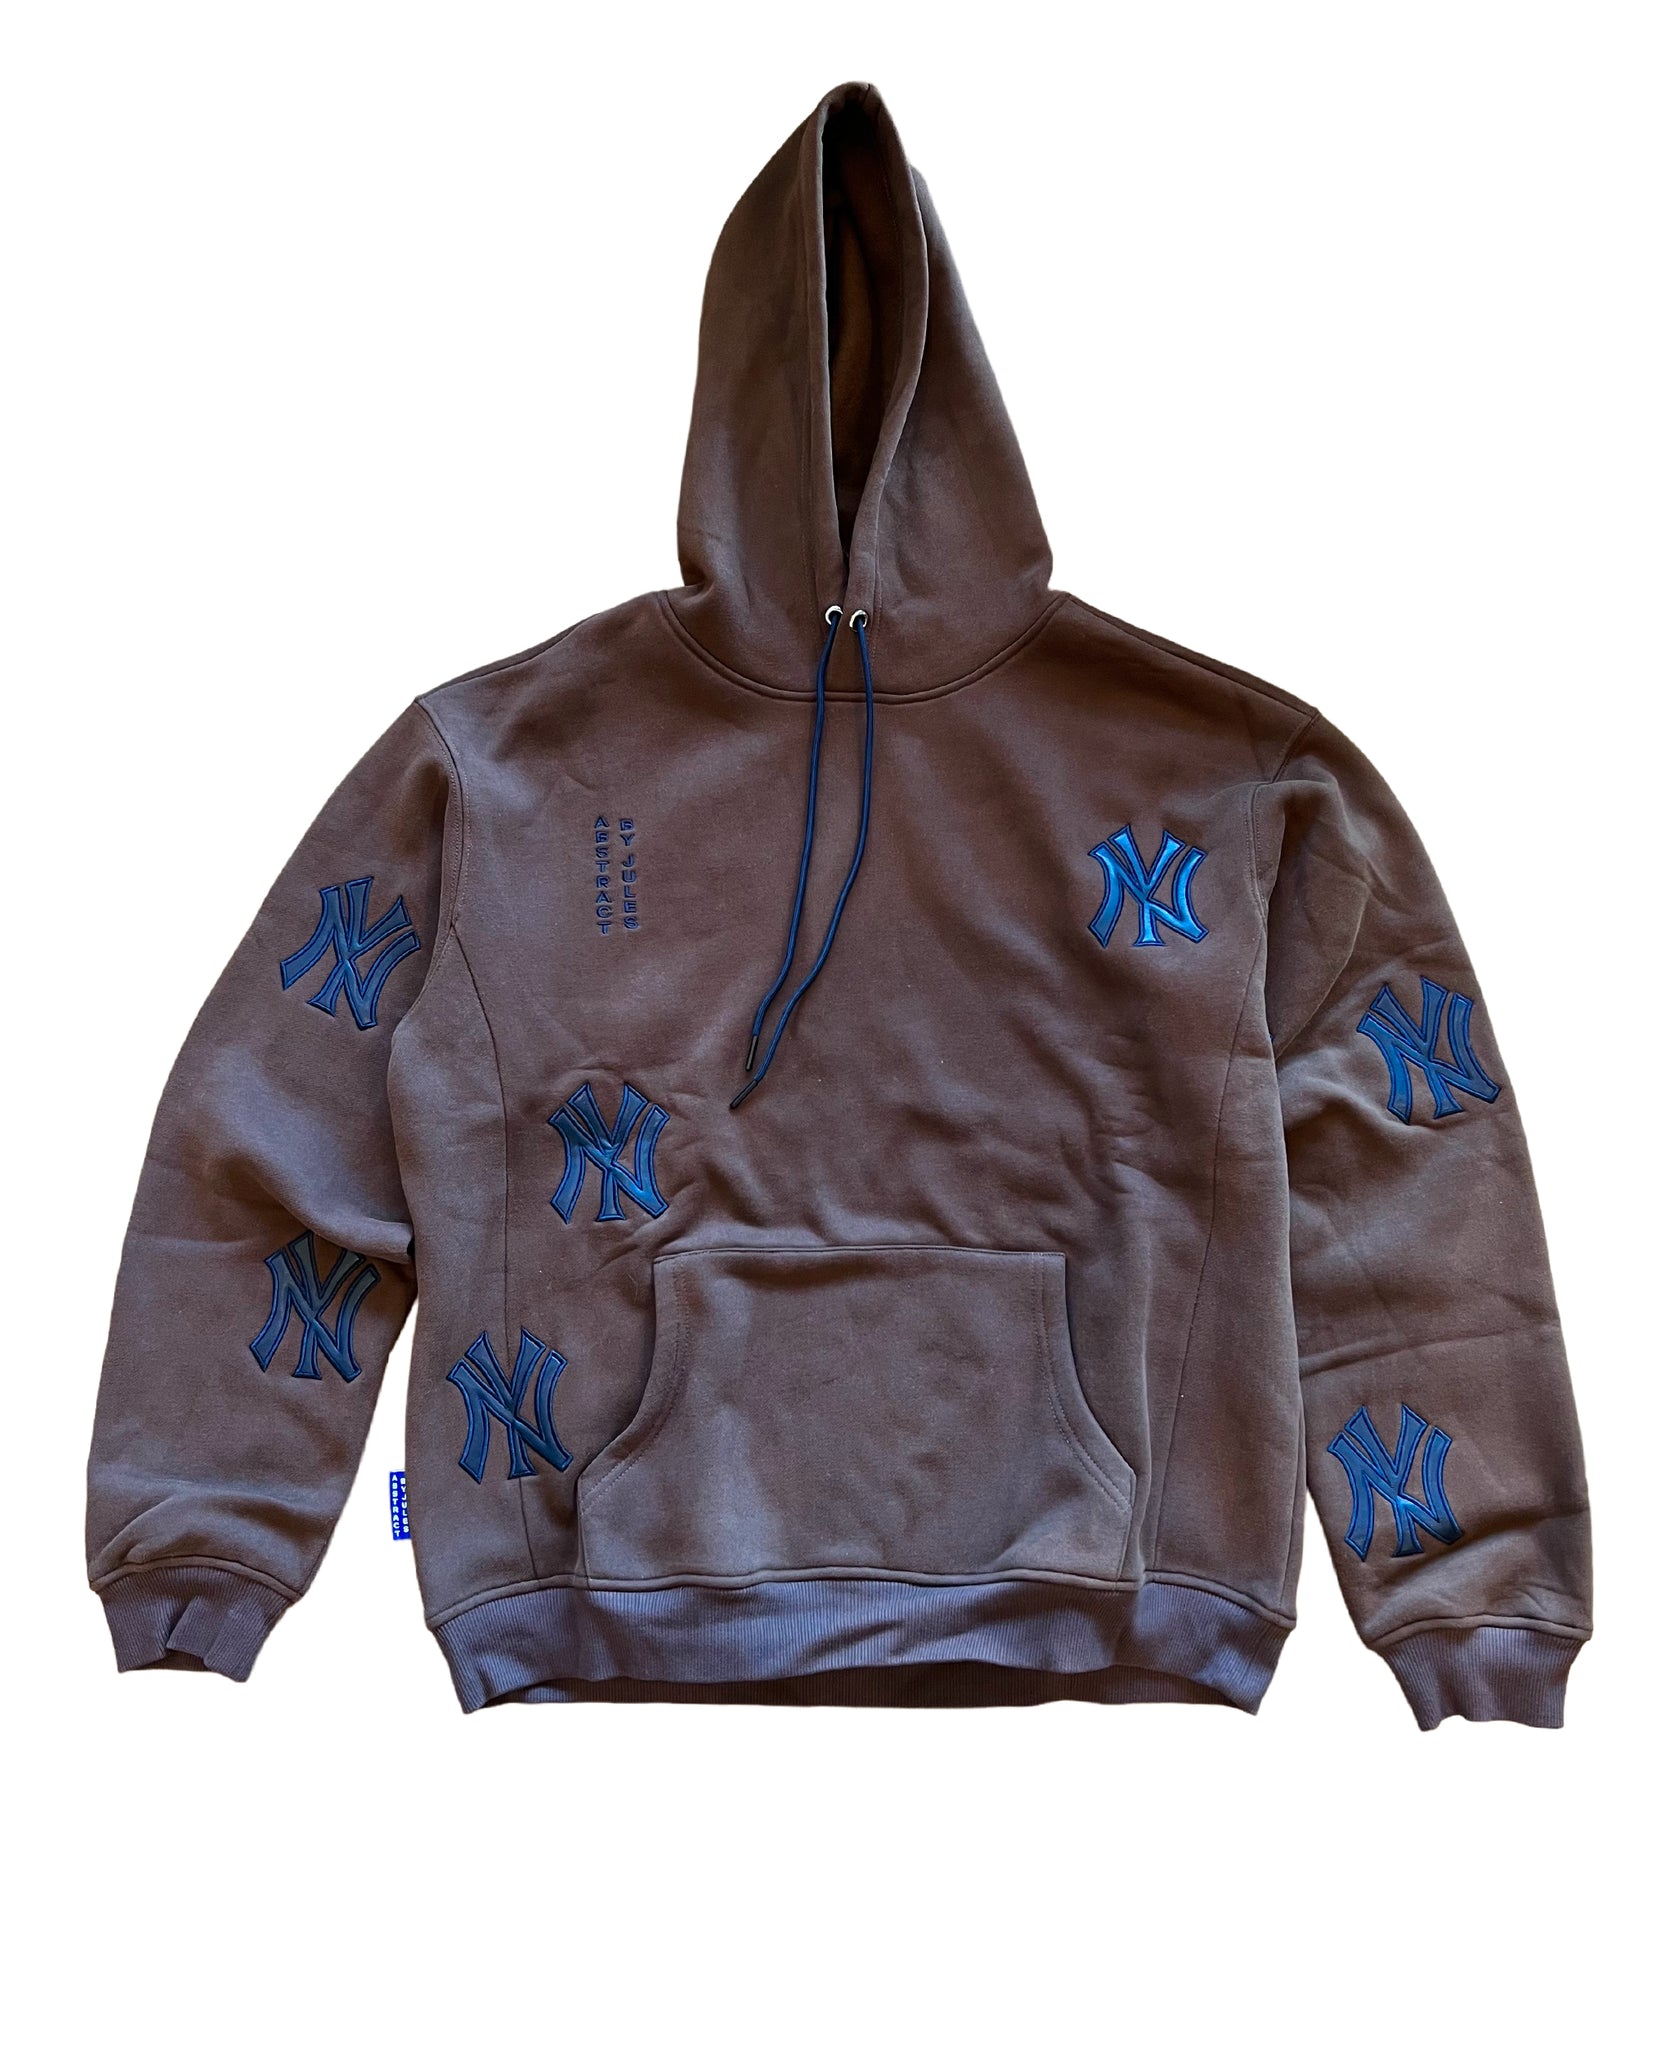 New York Patch Hoodie - Brown